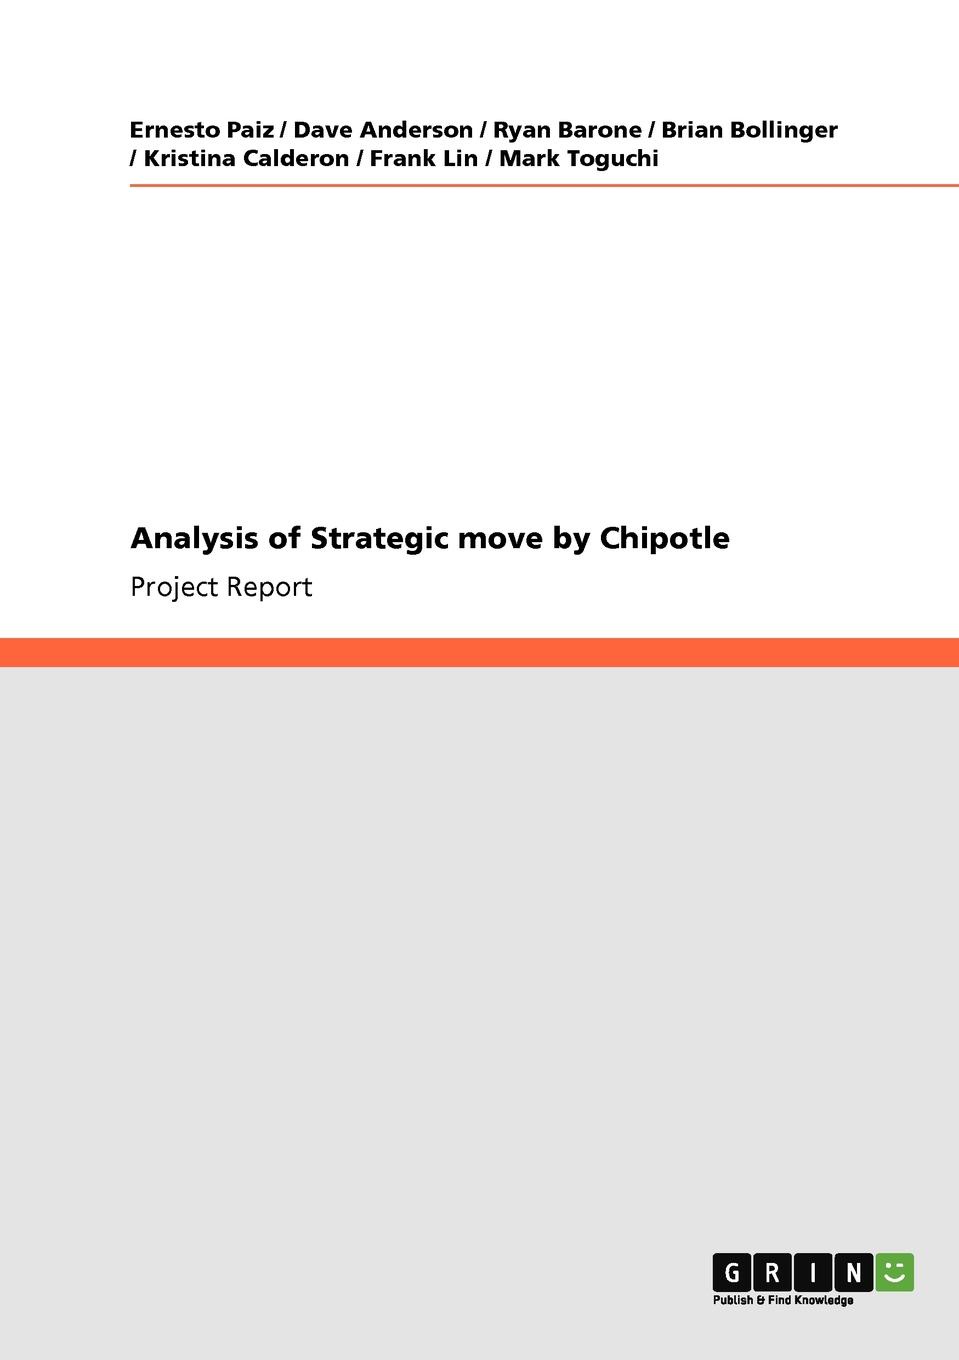 Analysis of Strategic move by Chipotle